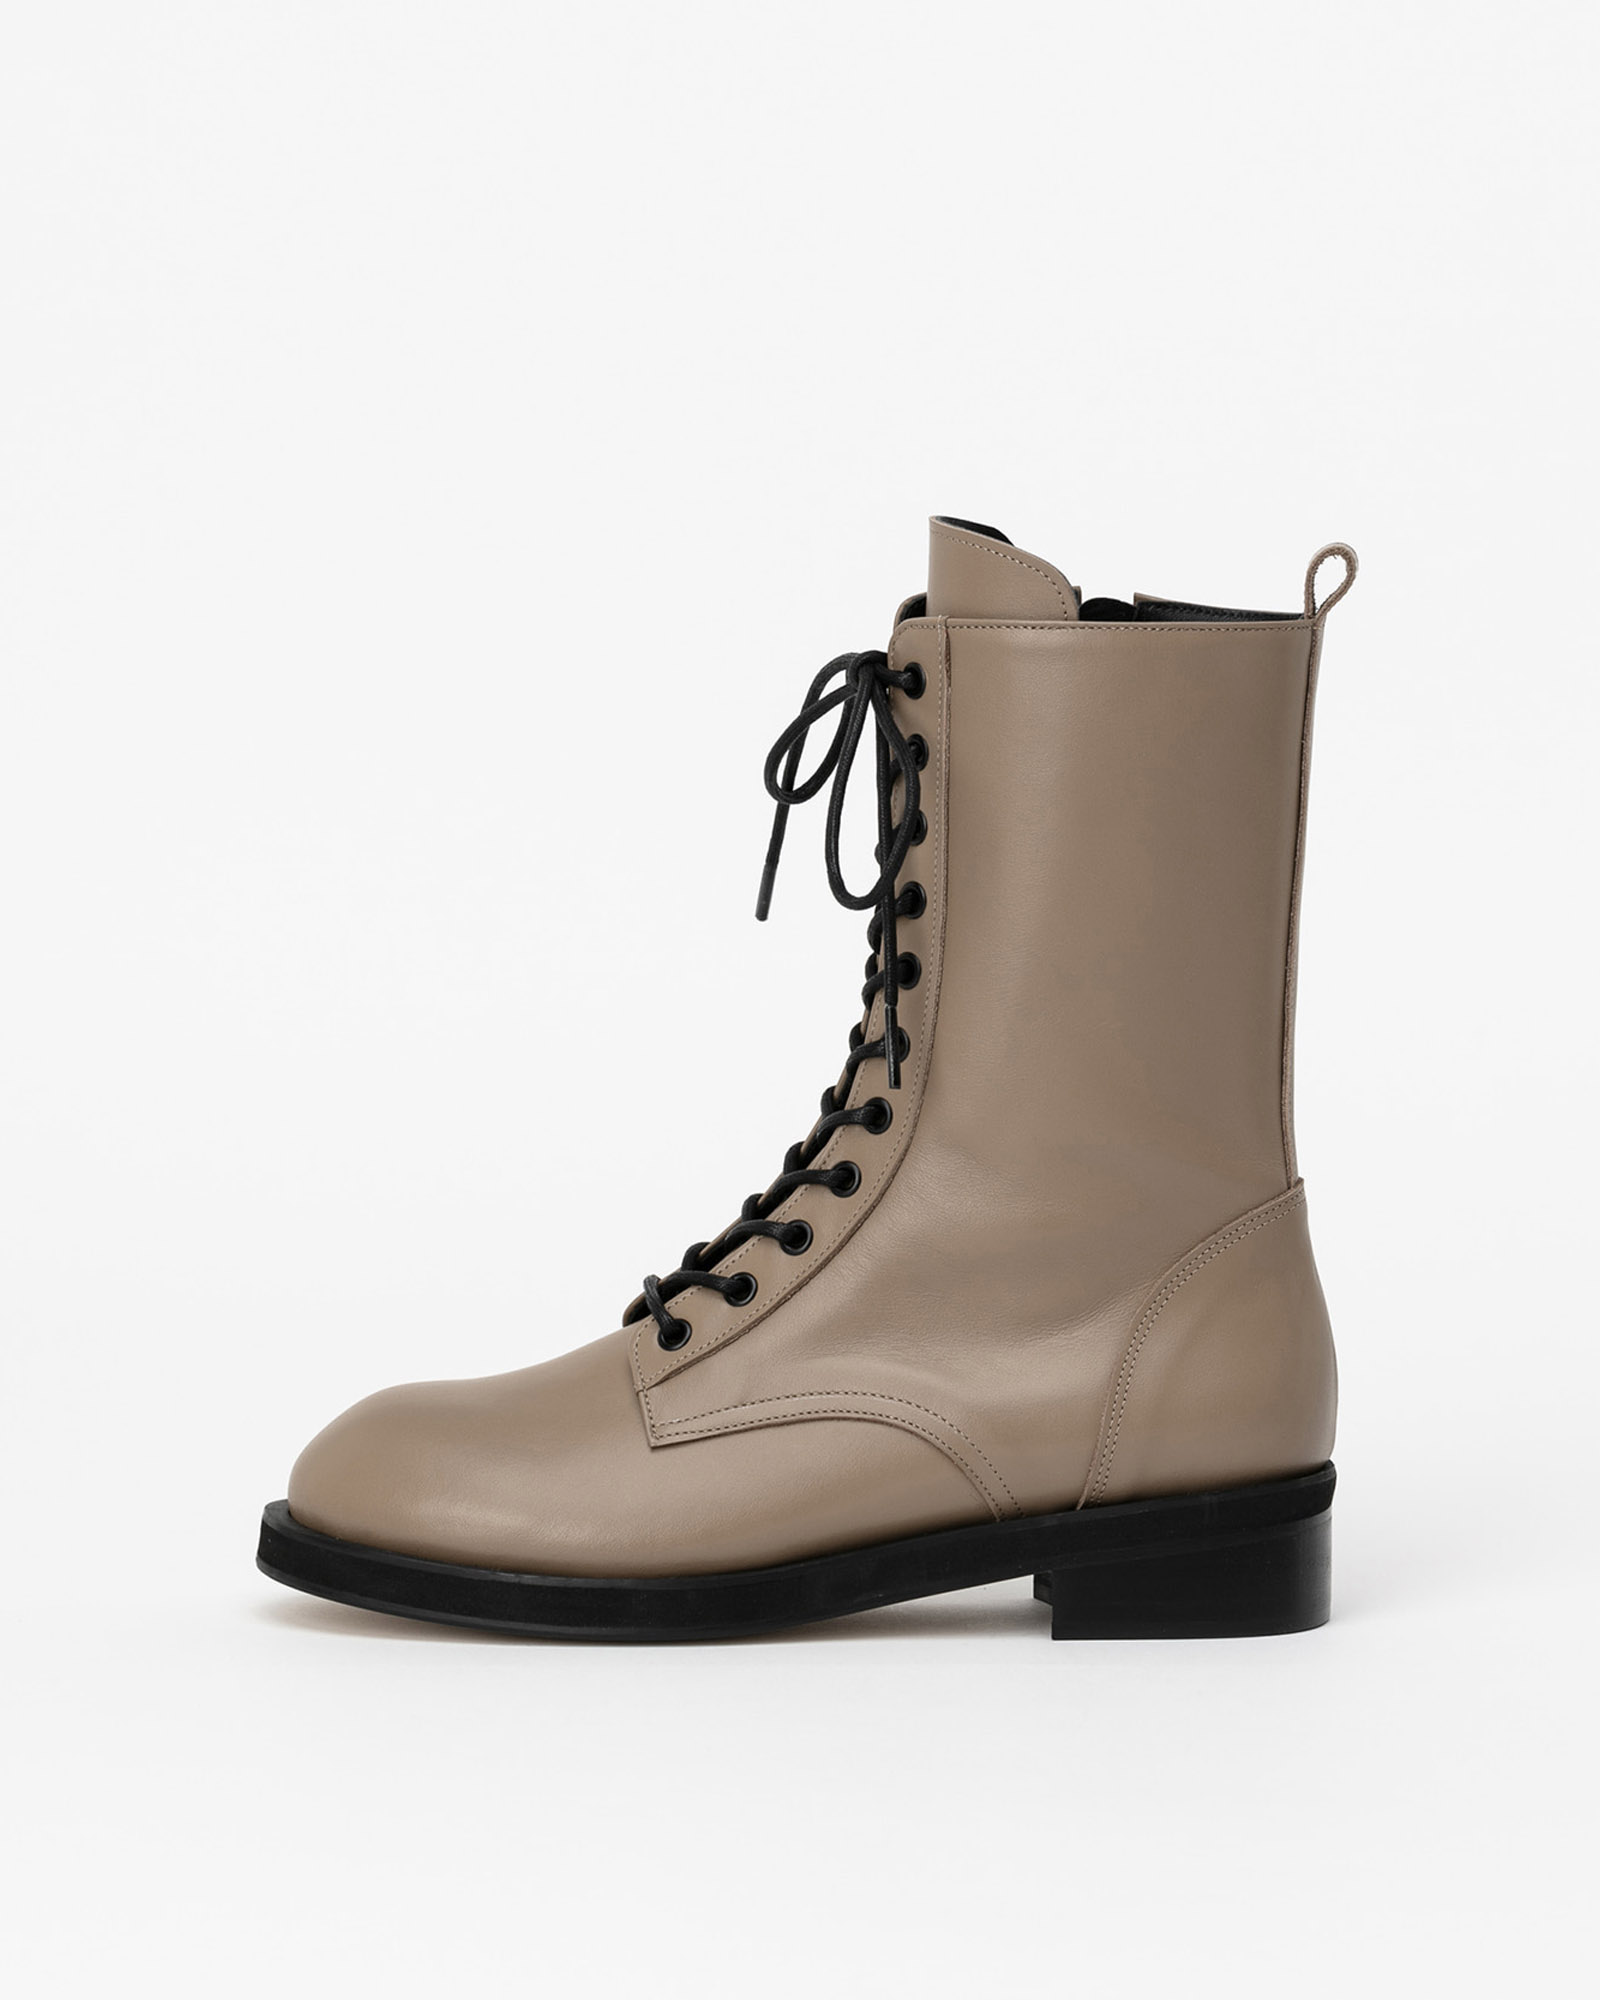 Bell Combat Boots in Etoffe Gray